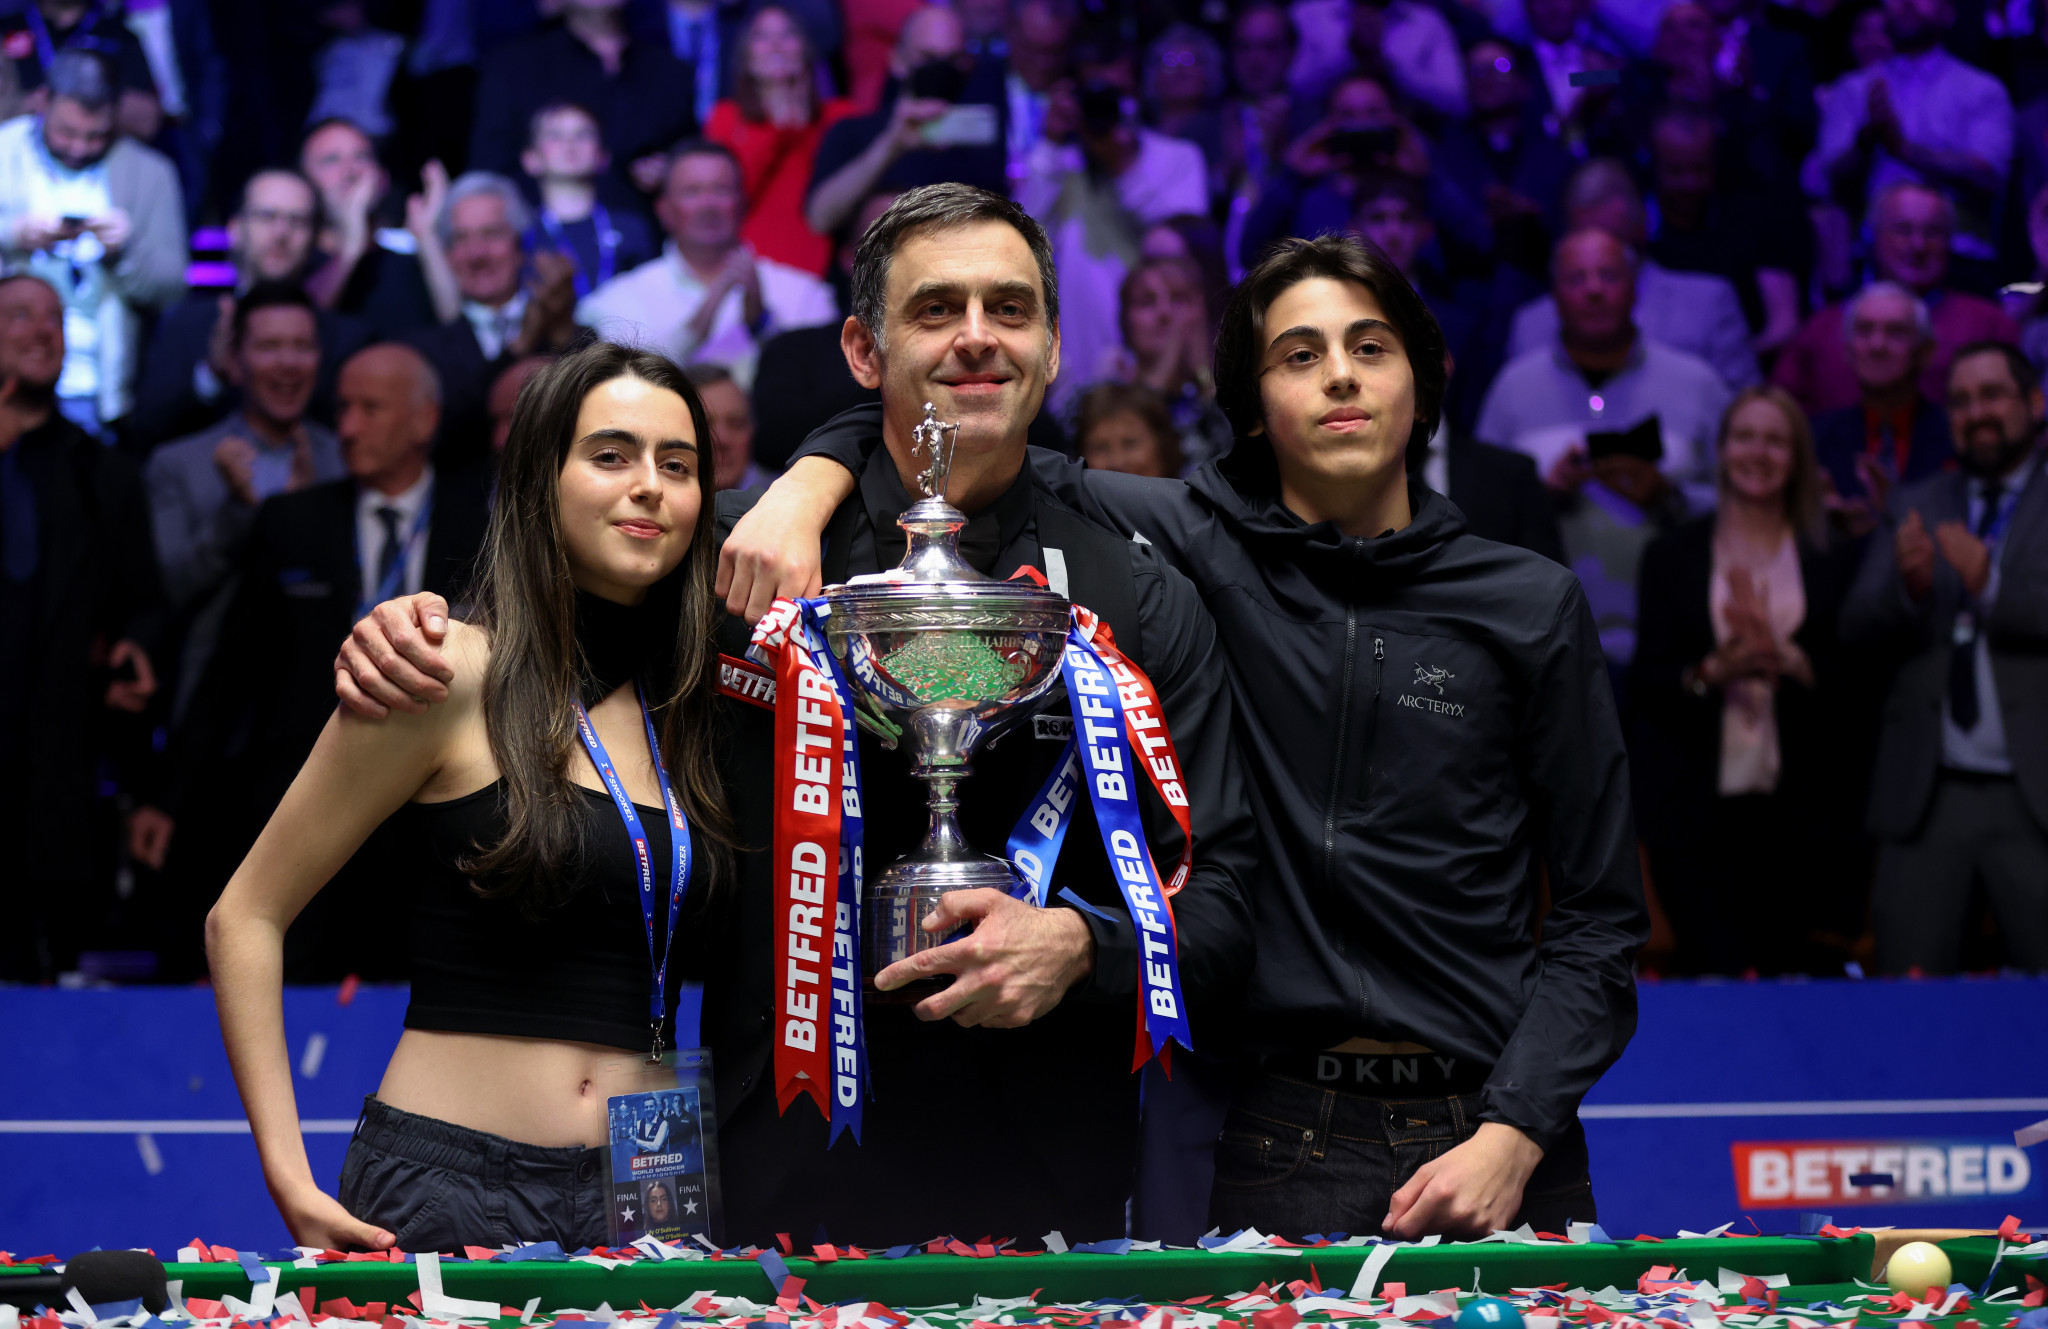 Ronnie O'Sullivan, pictured with his children Lily and Ronnie, won a record-equalling seventh World Snooker Championship title at the Crucible Theatre ©Getty Images